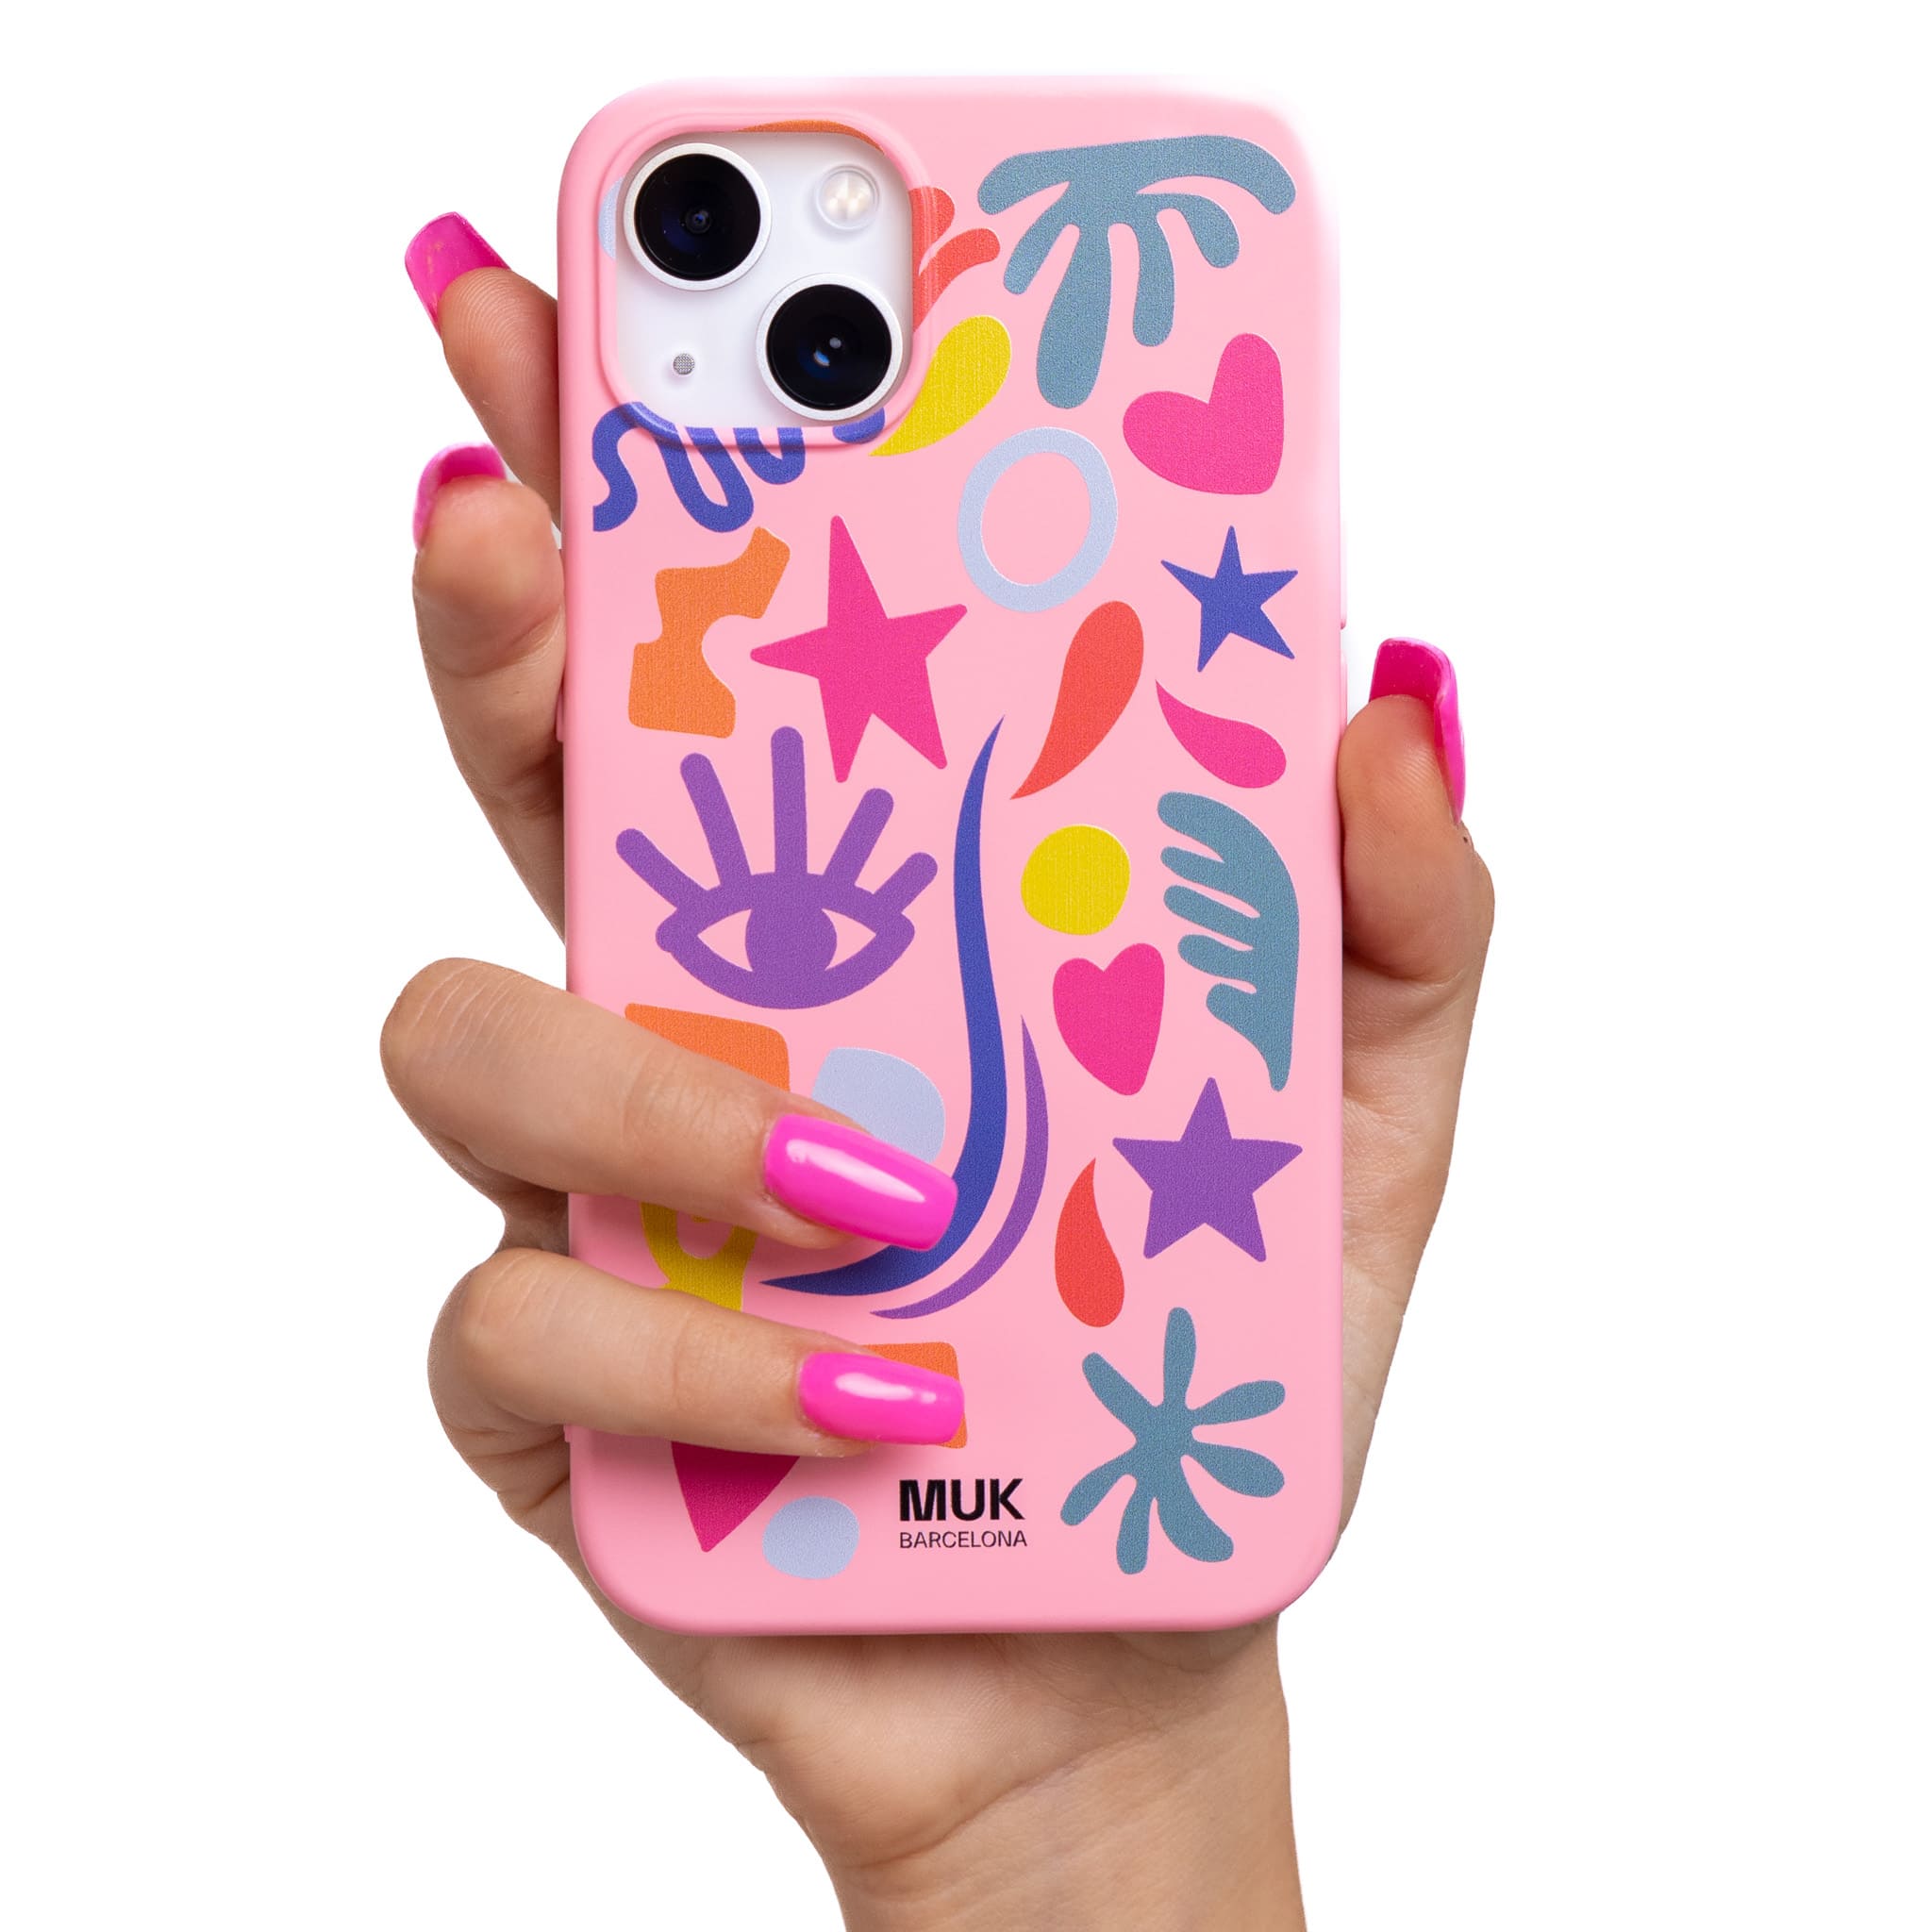 Pink TPU  case with potpourri of drawings in different colors.
